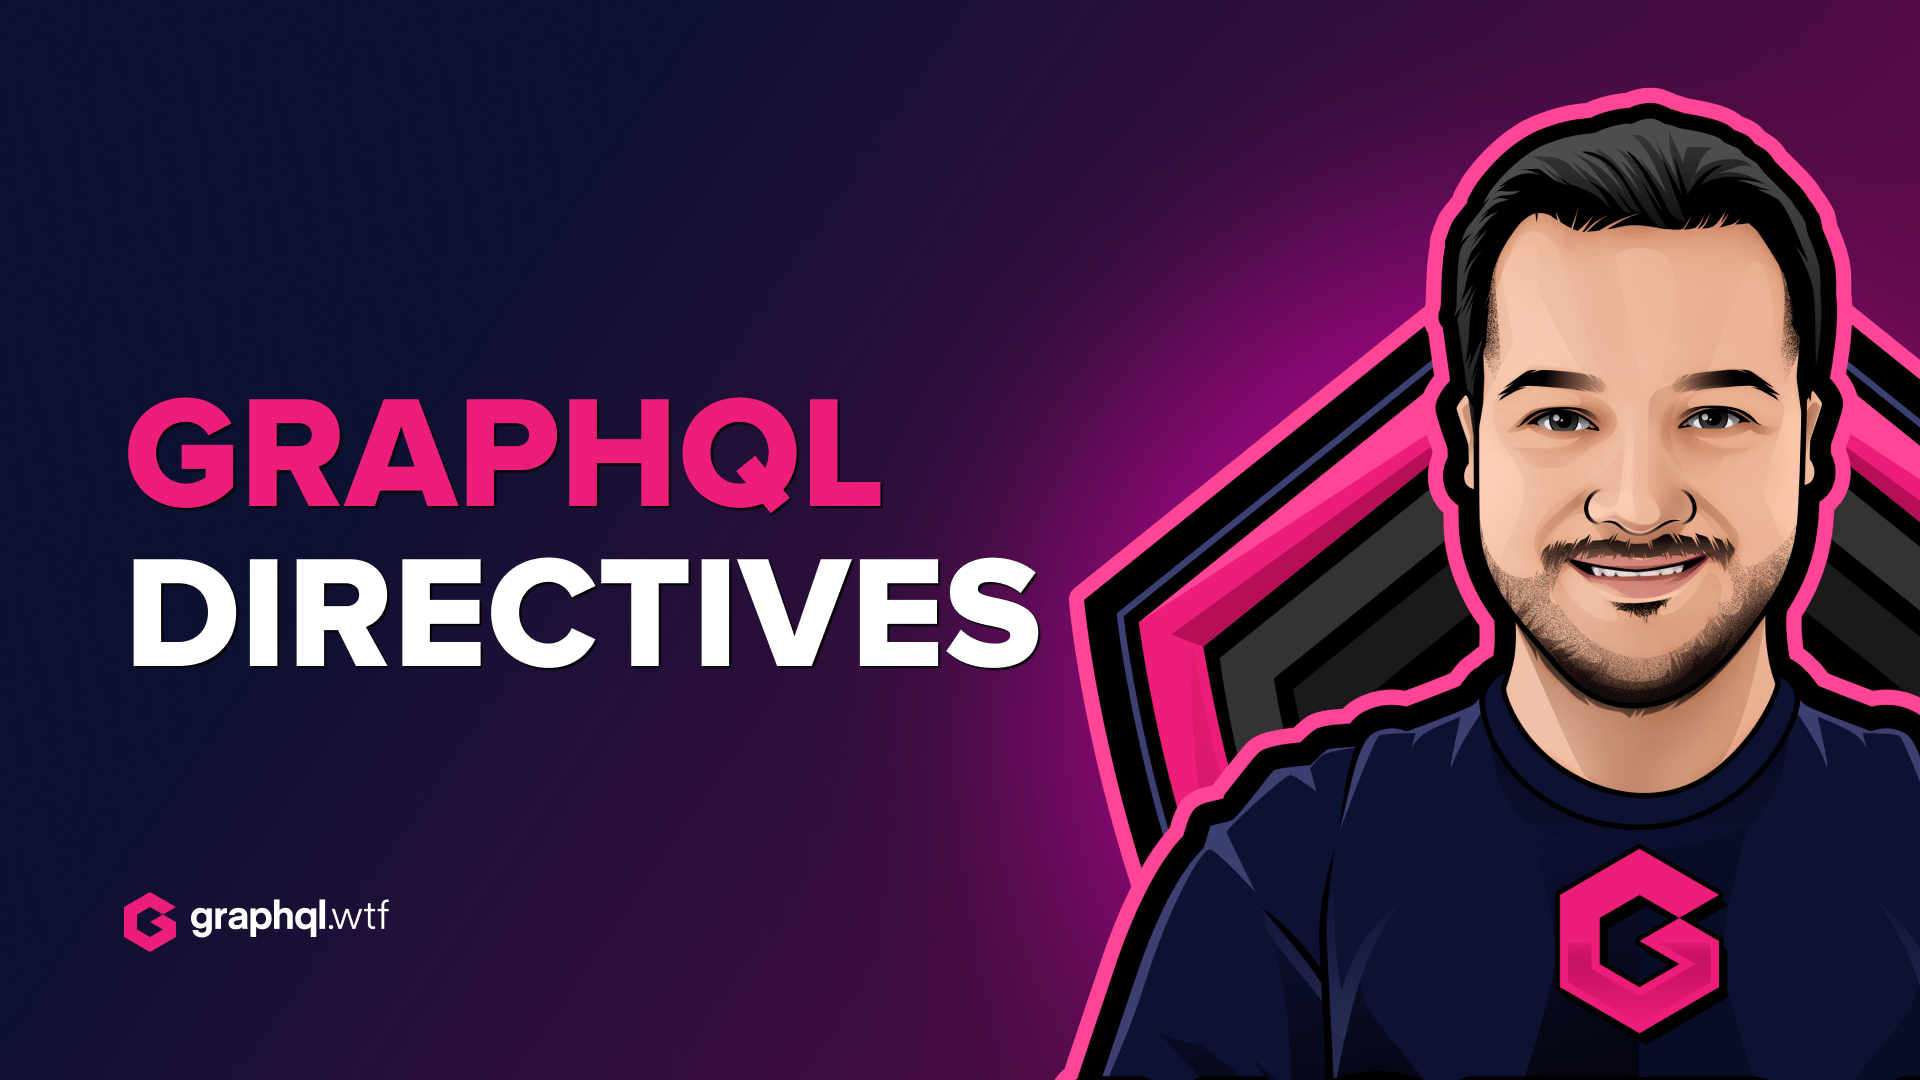 include, skip and deprecated GraphQL Directives